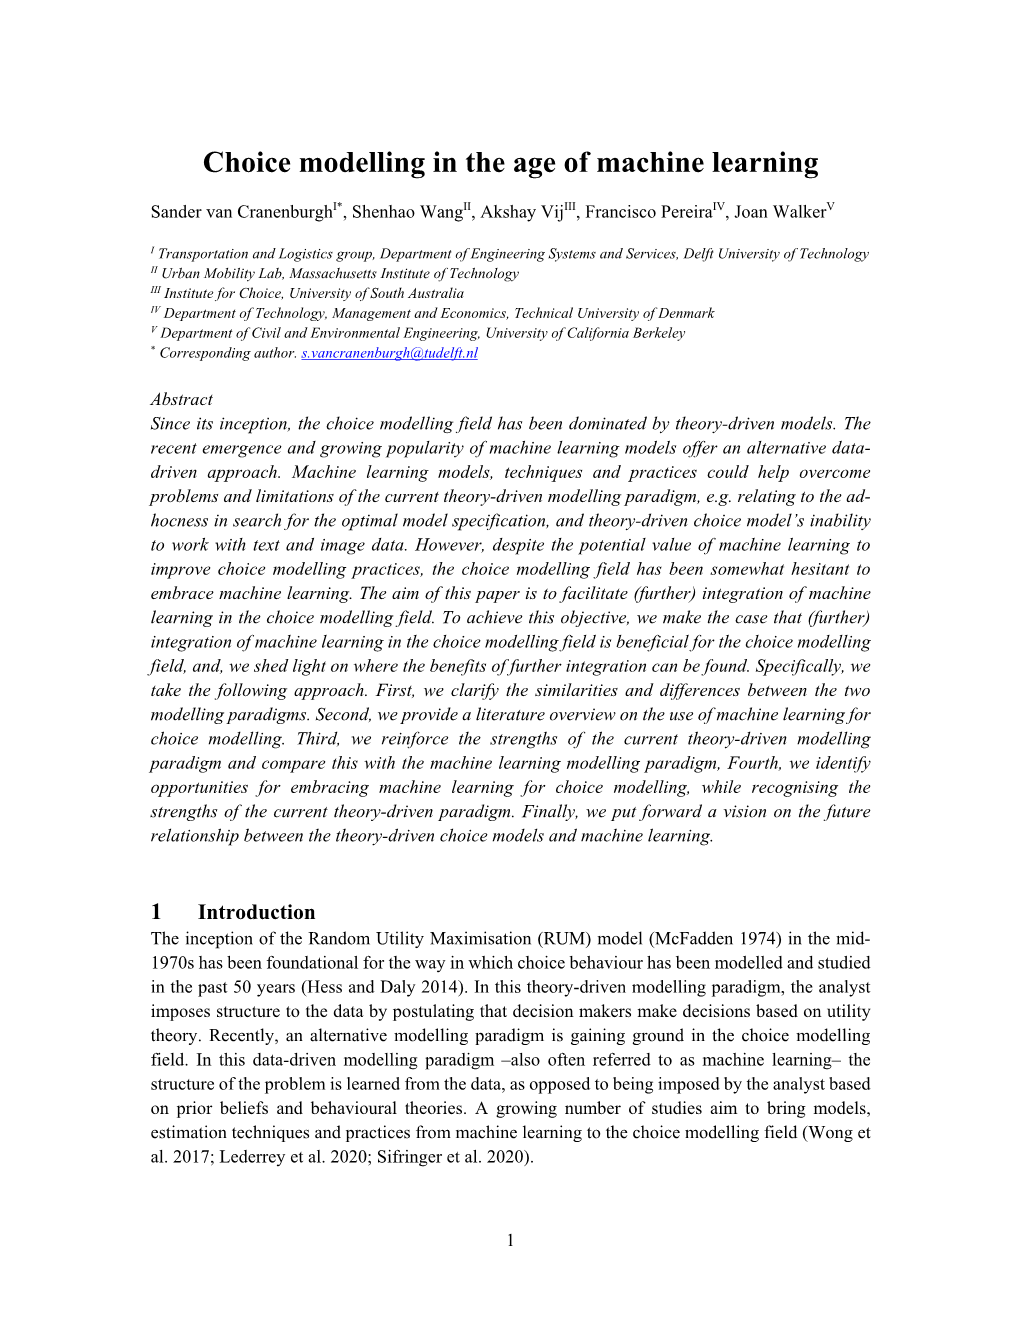 Choice Modelling in the Age of Machine Learning